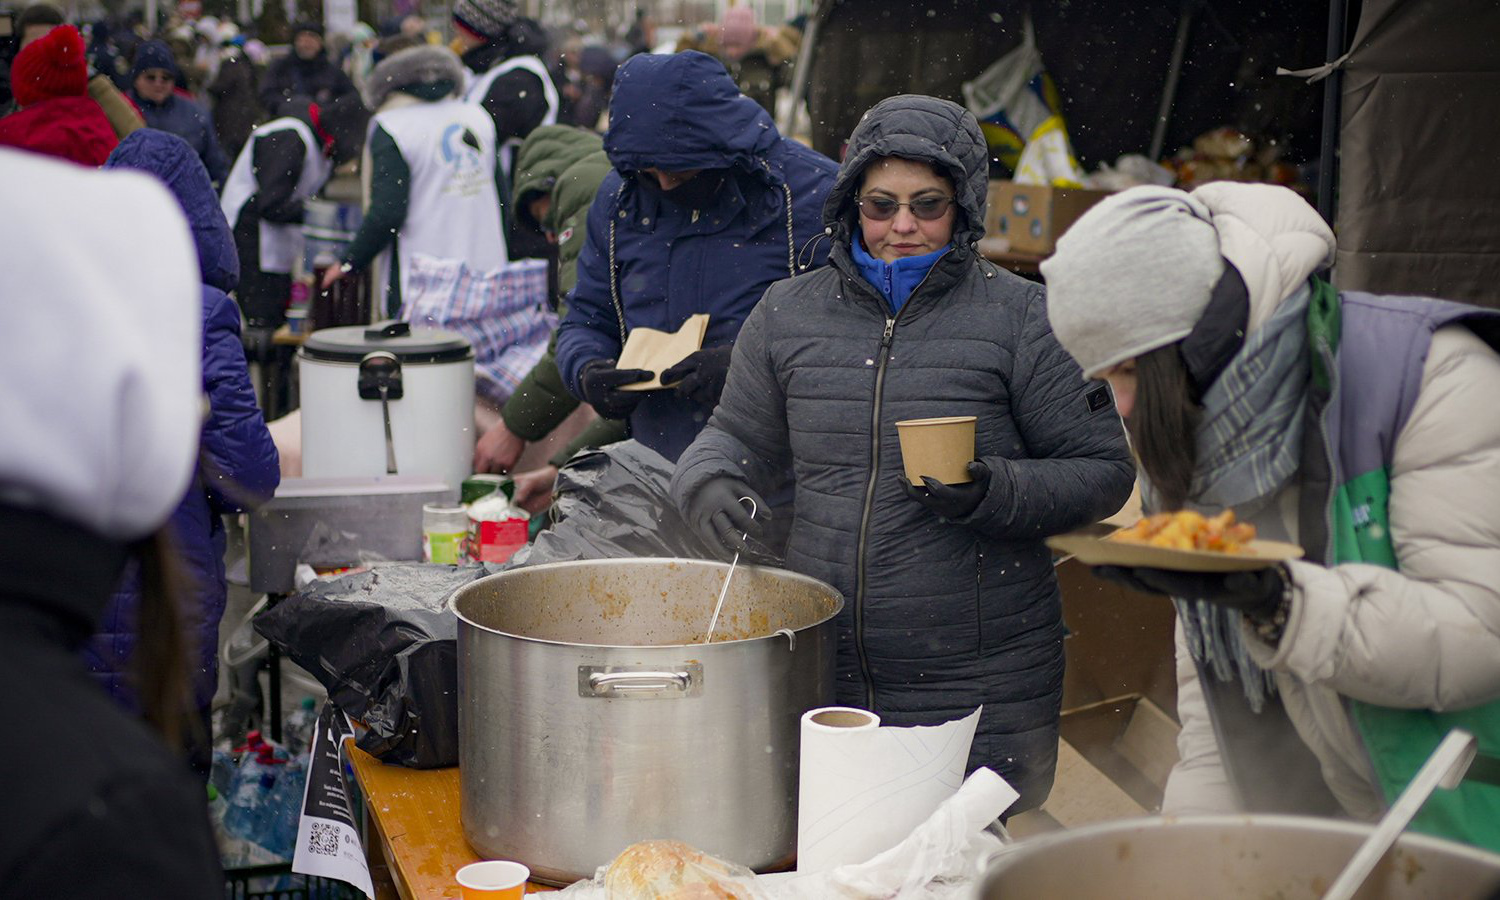 These 12 organizations are helping feed Ukrainian refugees fleeing the invasion.